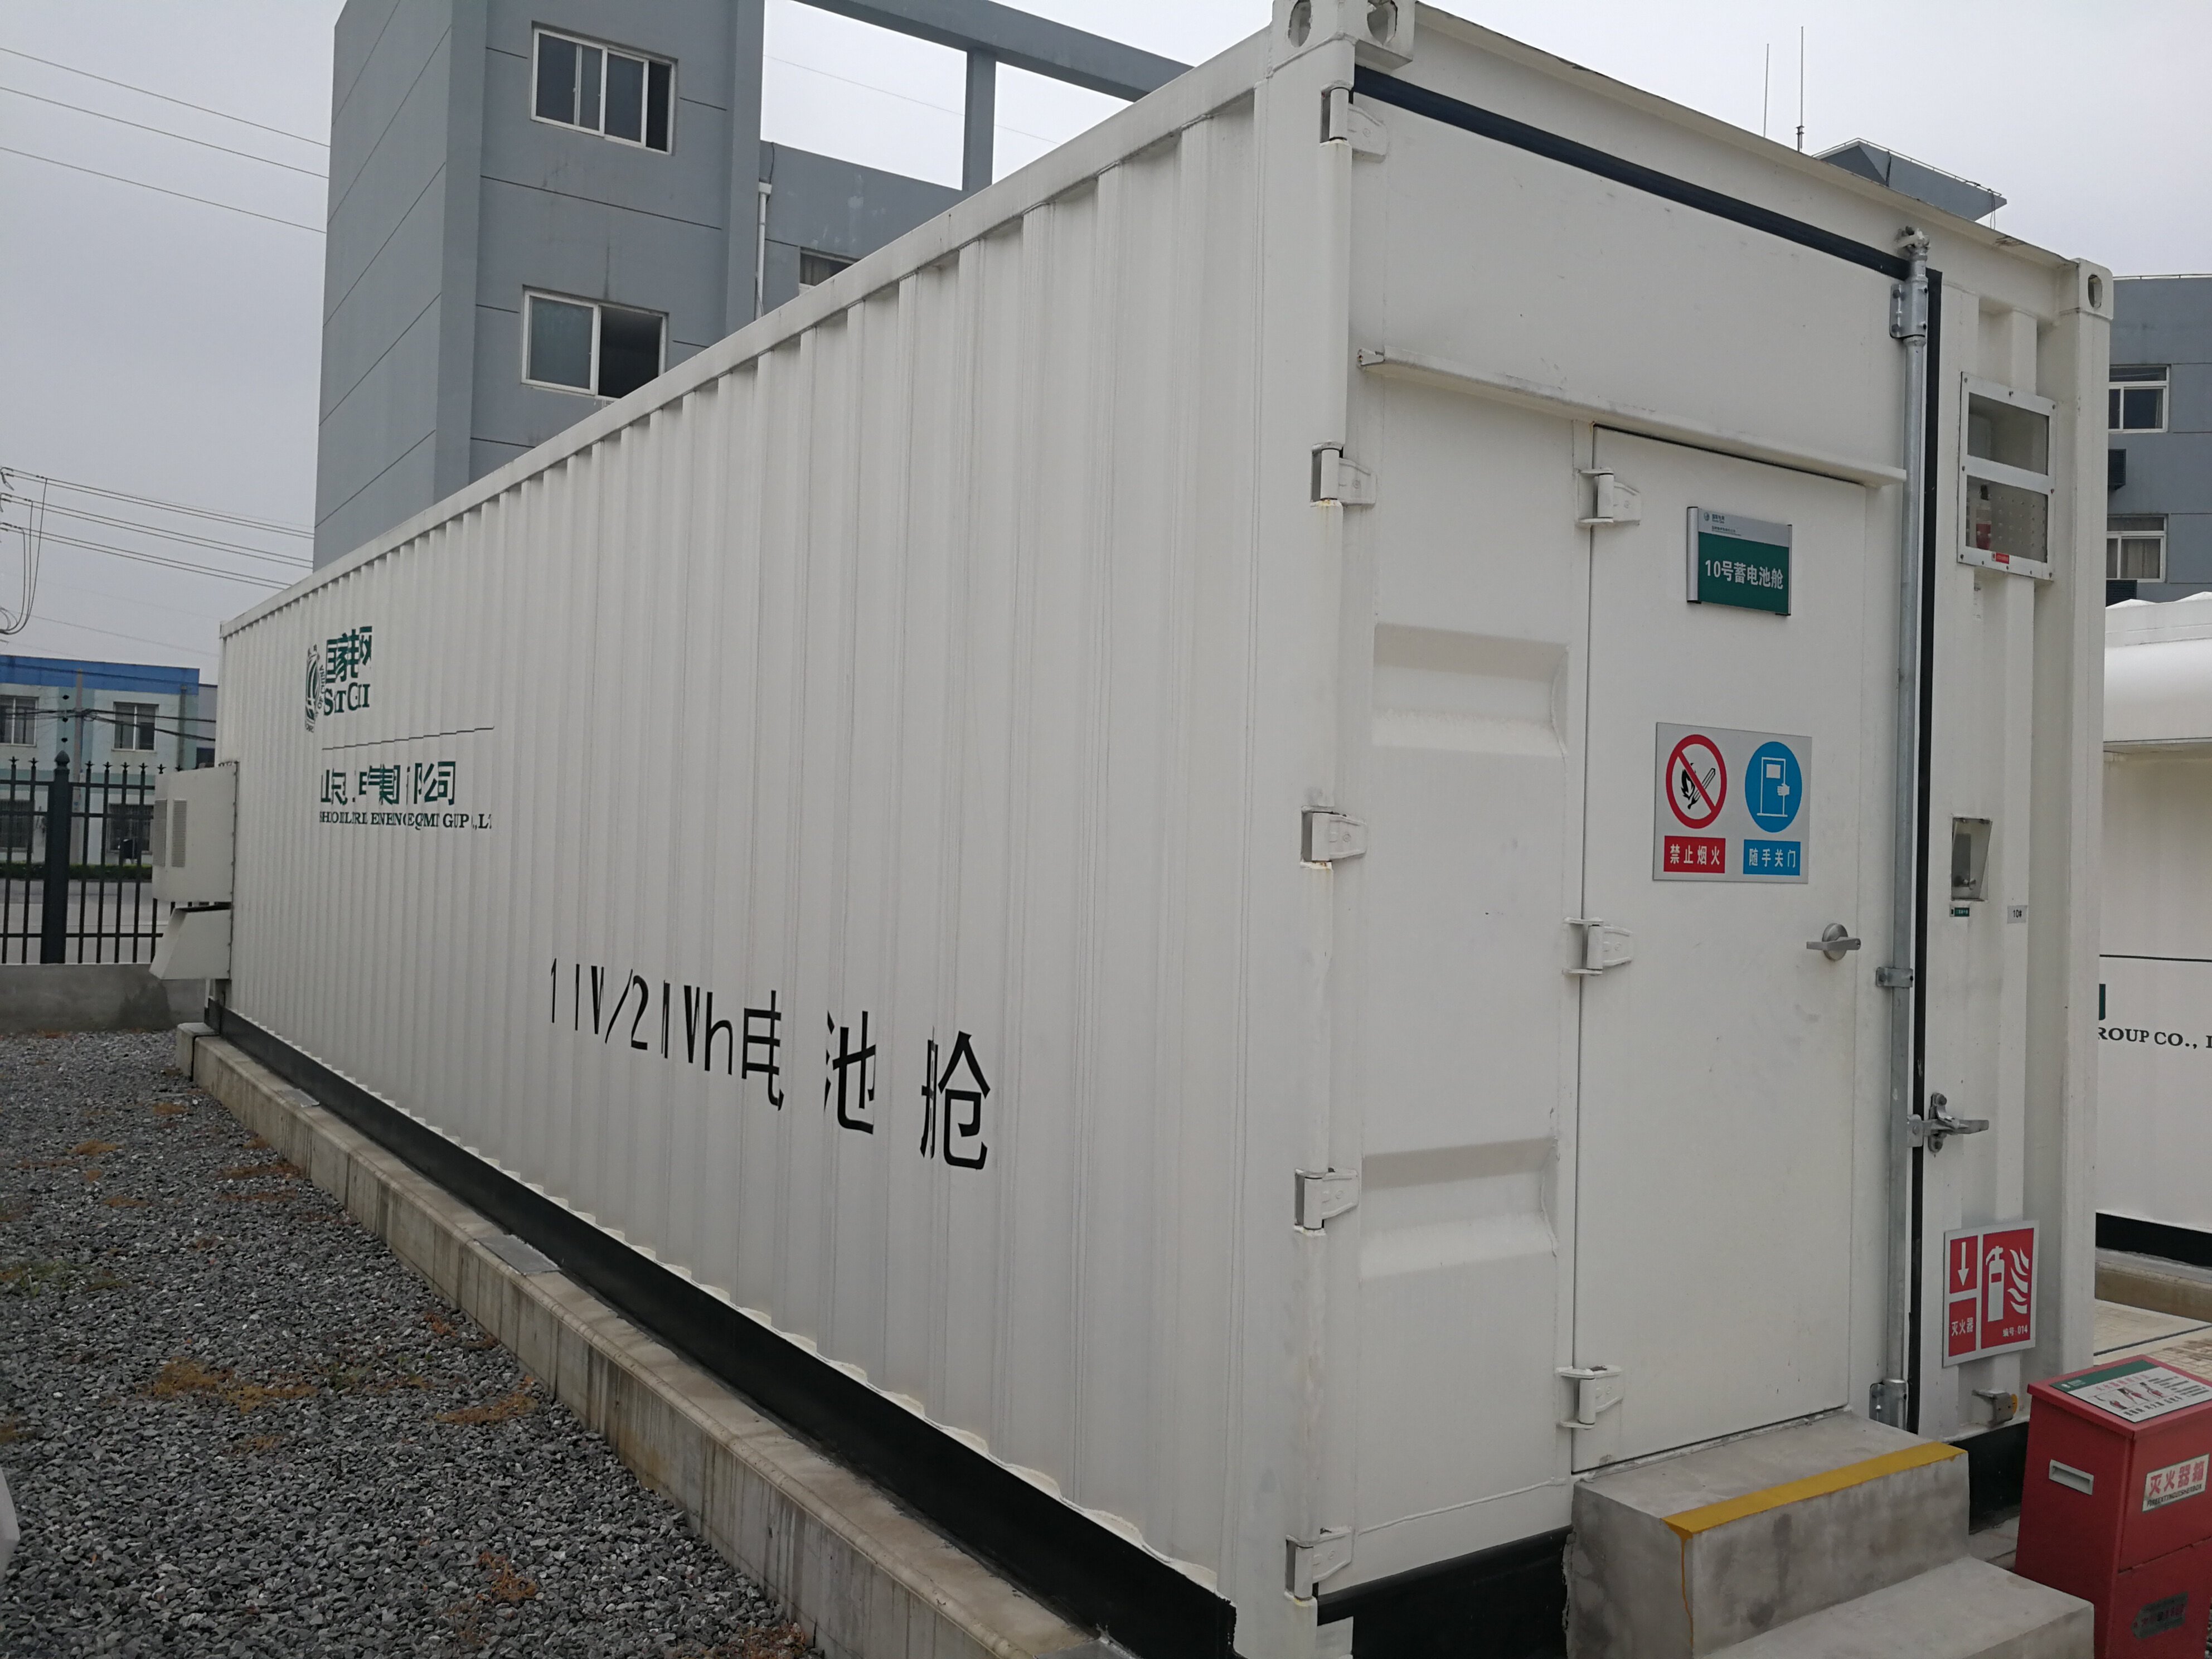 40ft energy storage container factory, 40ft energy storage container supplier, 40ft energy storage container company, 40ft energy storage container exporter, 40ft energy storage container wholesaler